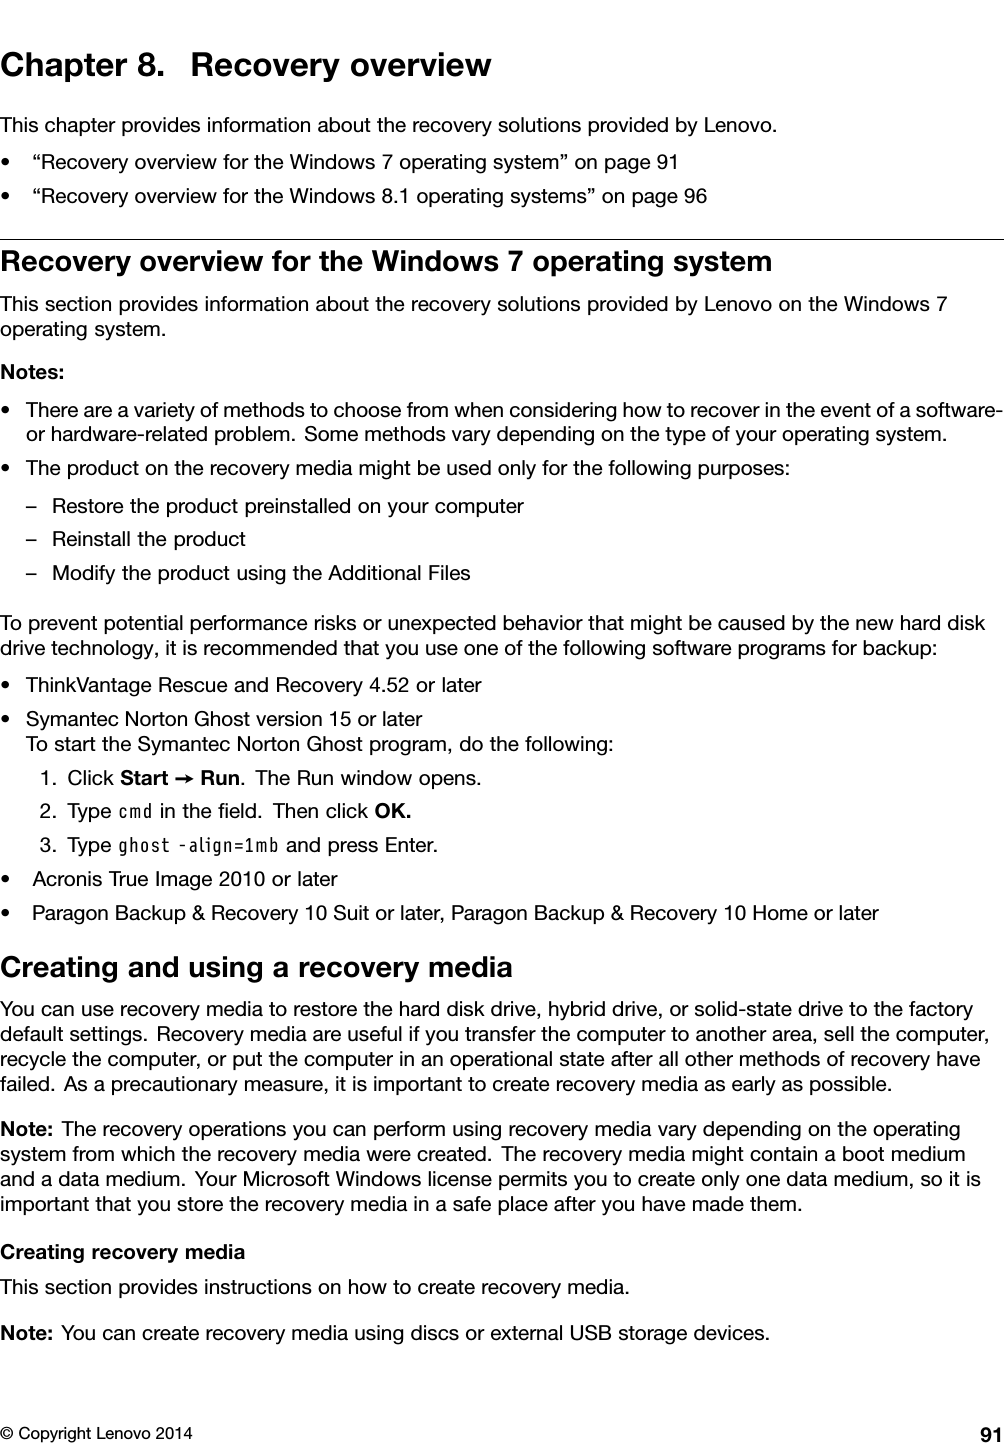 Chapter 8. Recovery overviewThis chapter provides information about the recovery solutions provided by Lenovo.• “Recovery overview for the Windows 7 operating system” on page 91• “Recovery overview for the Windows 8.1 operating systems” on page 96Recovery overview for the Windows 7 operating systemThis section provides information about the recovery solutions provided by Lenovo on the Windows 7operating system.Notes:• There are a variety of methods to choose from when considering how to recover in the event of a software-or hardware-related problem. Some methods vary depending on the type of your operating system.• The product on the recovery media might be used only for the following purposes:– Restore the product preinstalled on your computer– Reinstall the product– Modify the product using the Additional FilesTo prevent potential performance risks or unexpected behavior that might be caused by the new hard diskdrive technology, it is recommended that you use one of the following software programs for backup:• ThinkVantage Rescue and Recovery 4.52 or later• Symantec Norton Ghost version 15 or laterTo start the Symantec Norton Ghost program, do the following:1. Click Start ➙Run. The Run window opens.2. Type  in the ﬁeld. Then click OK.3. Type   and press Enter.• Acronis True Image 2010 or later• Paragon Backup &amp; Recovery 10 Suit or later, Paragon Backup &amp; Recovery 10 Home or laterCreating and using a recovery mediaYou can use recovery media to restore the hard disk drive, hybrid drive, or solid-state drive to the factorydefault settings. Recovery media are useful if you transfer the computer to another area, sell the computer,recycle the computer, or put the computer in an operational state after all other methods of recovery havefailed. As a precautionary measure, it is important to create recovery media as early as possible.Note: The recovery operations you can perform using recovery media vary depending on the operatingsystem from which the recovery media were created. The recovery media might contain a boot mediumand a data medium. Your Microsoft Windows license permits you to create only one data medium, so it isimportant that you store the recovery media in a safe place after you have made them.Creating recovery mediaThis section provides instructions on how to create recovery media.Note: You can create recovery media using discs or external USB storage devices.© Copyright Lenovo 2014 91